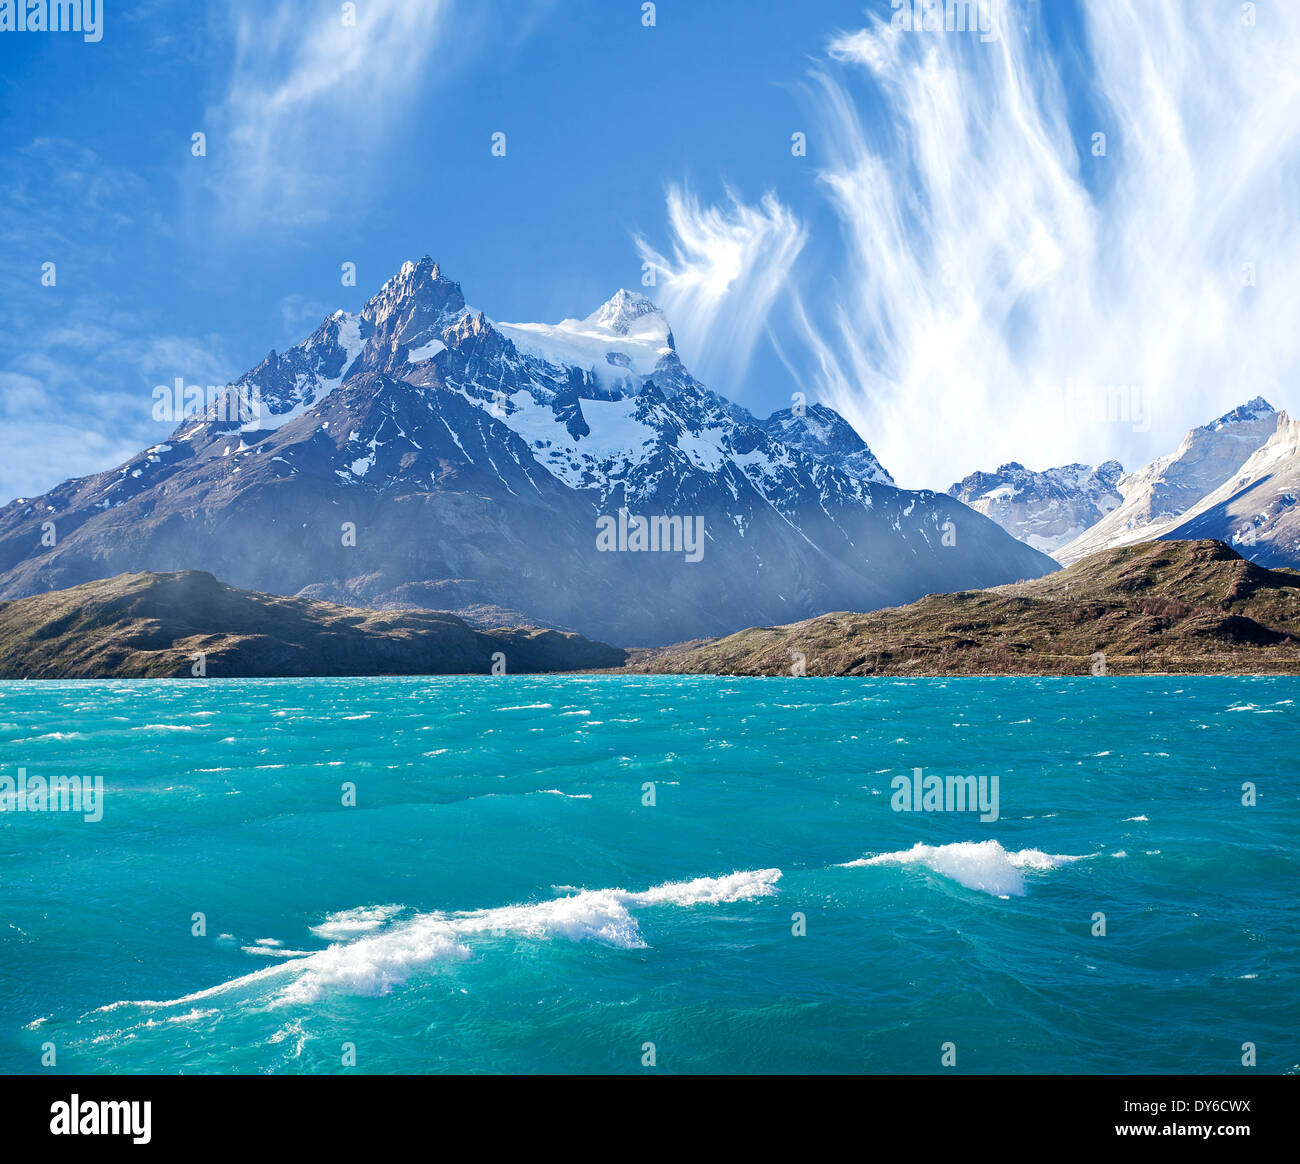 Pehoe Bergsee Los Cuernos (The Horns), Nationalpark Torres del Paine, Chile. Stockfoto